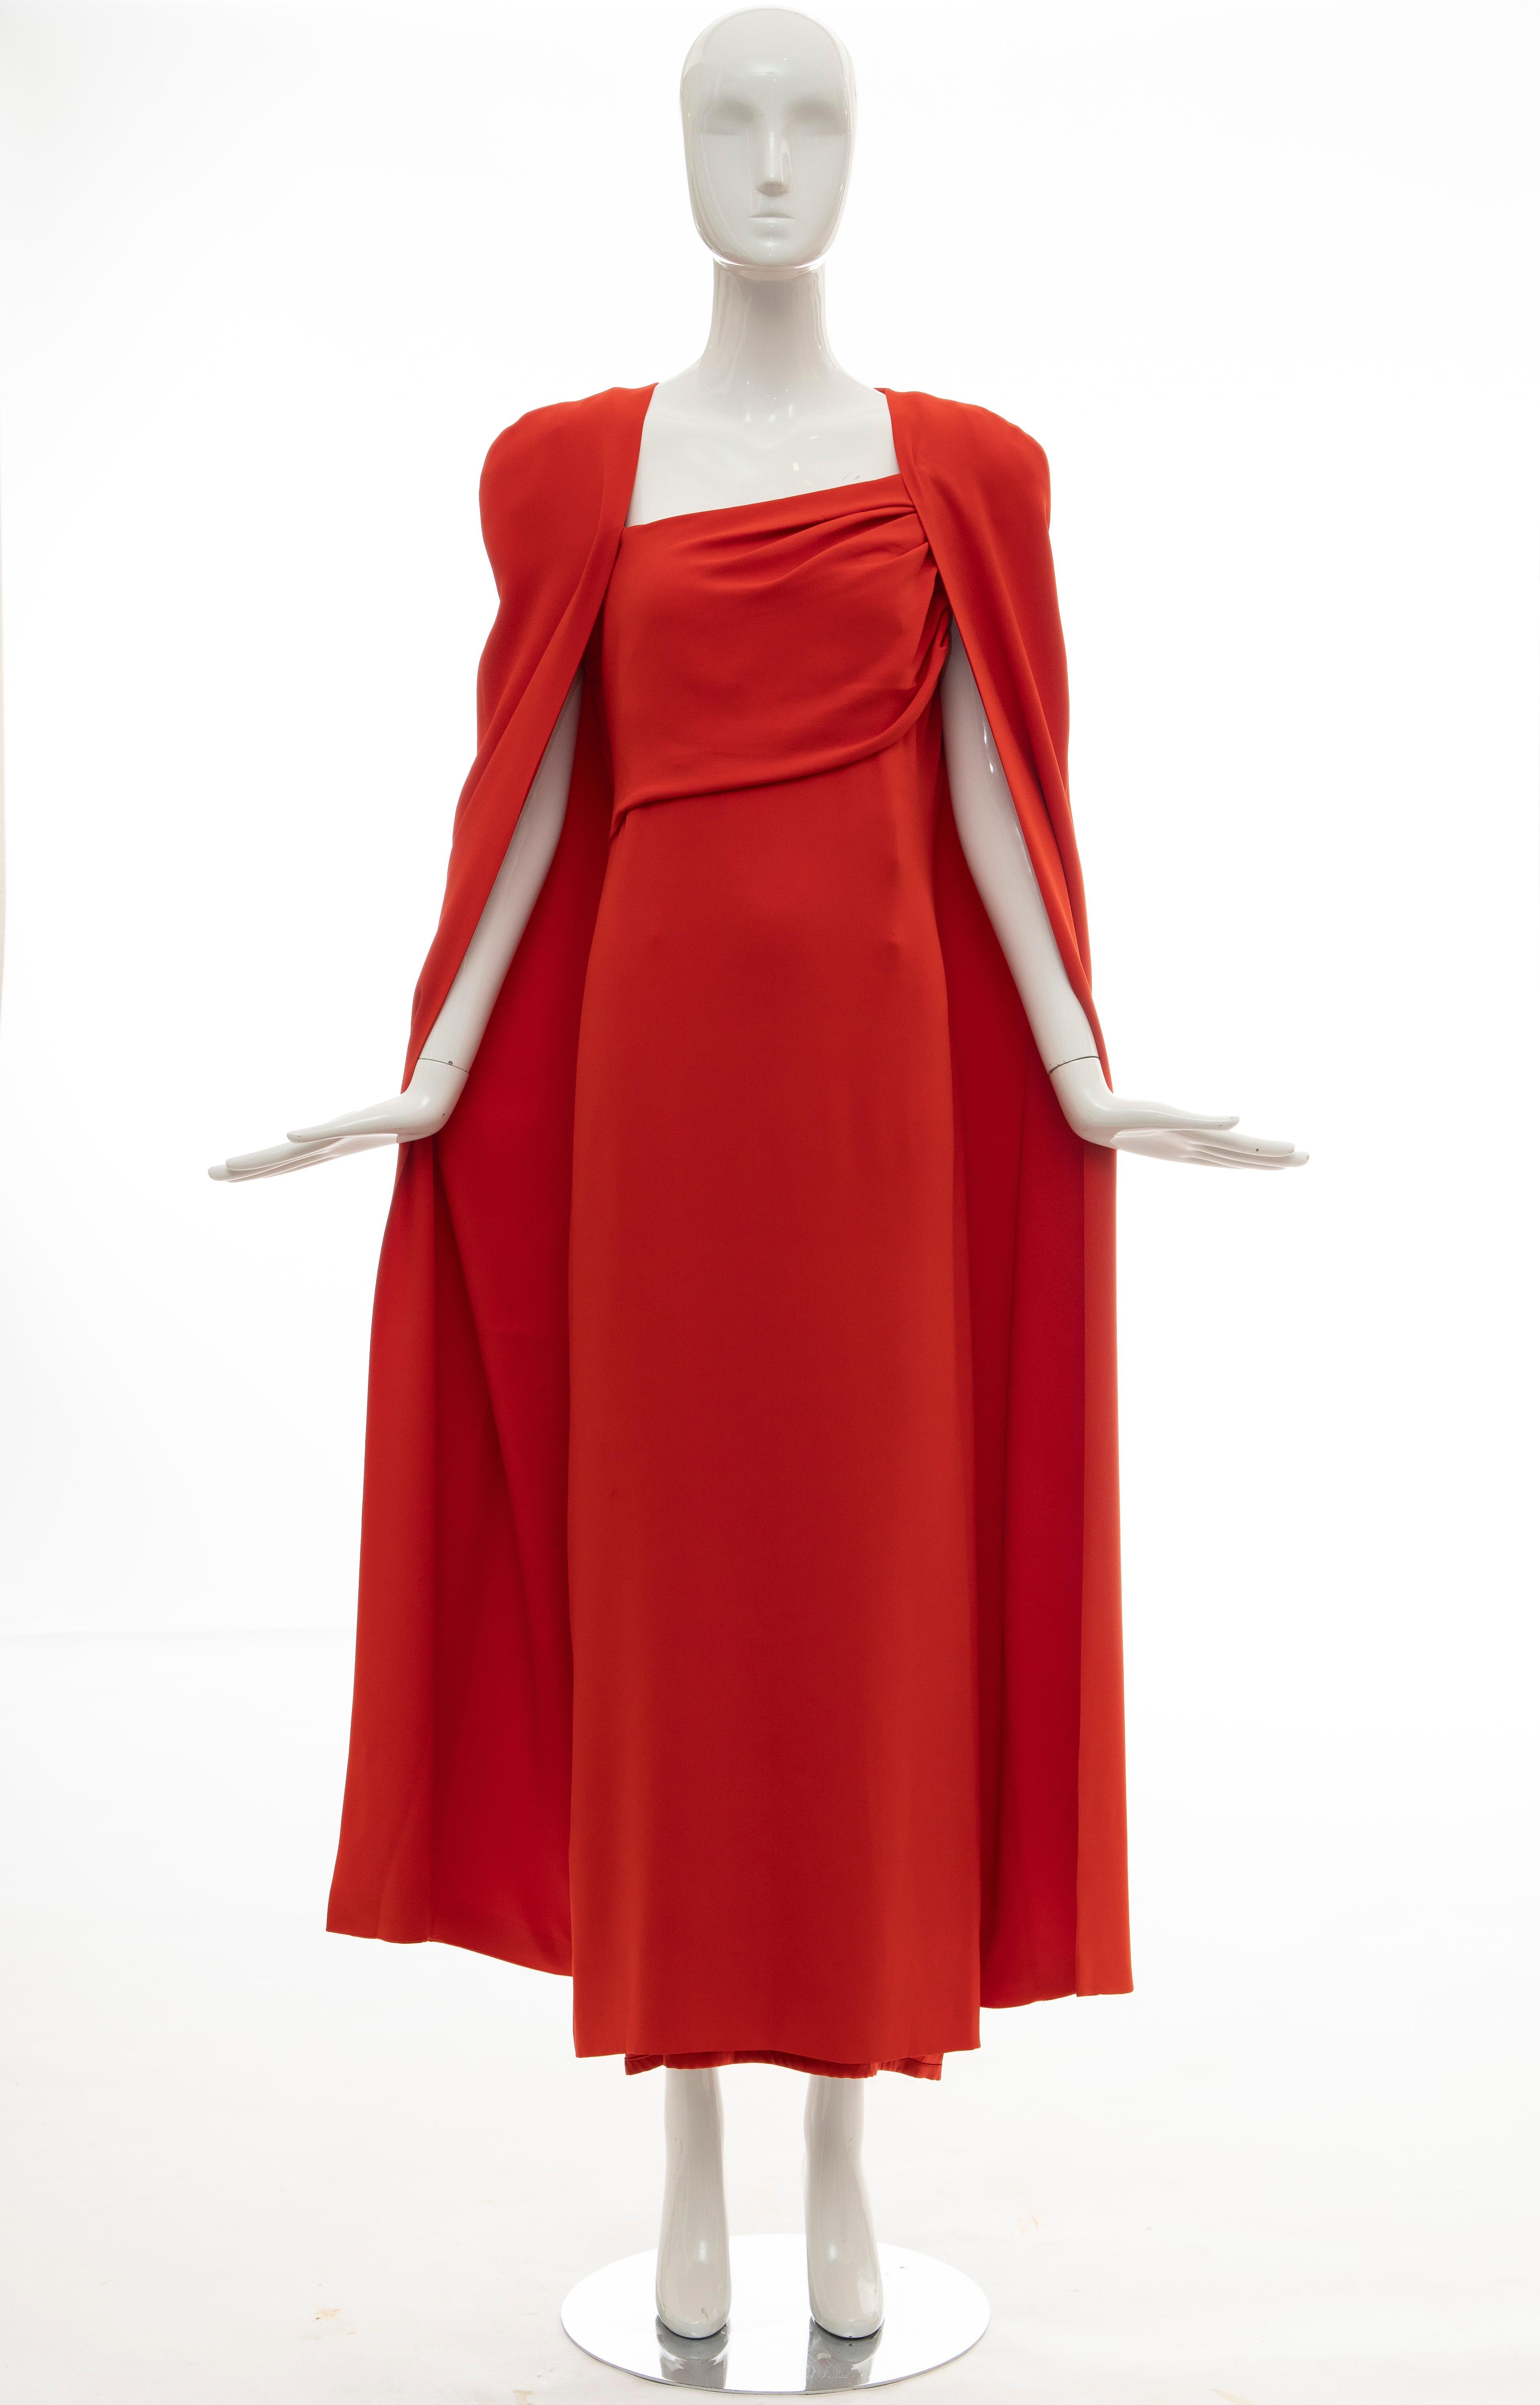 Tom Ford Runway Fall 2012, silk persimmon evening dress ensemble. Cape features tonal stitching throughout, open front and fully lined in silk. Dress features cap sleeves, gathering at bodice, slit at back and concealed zip closure at back and fully